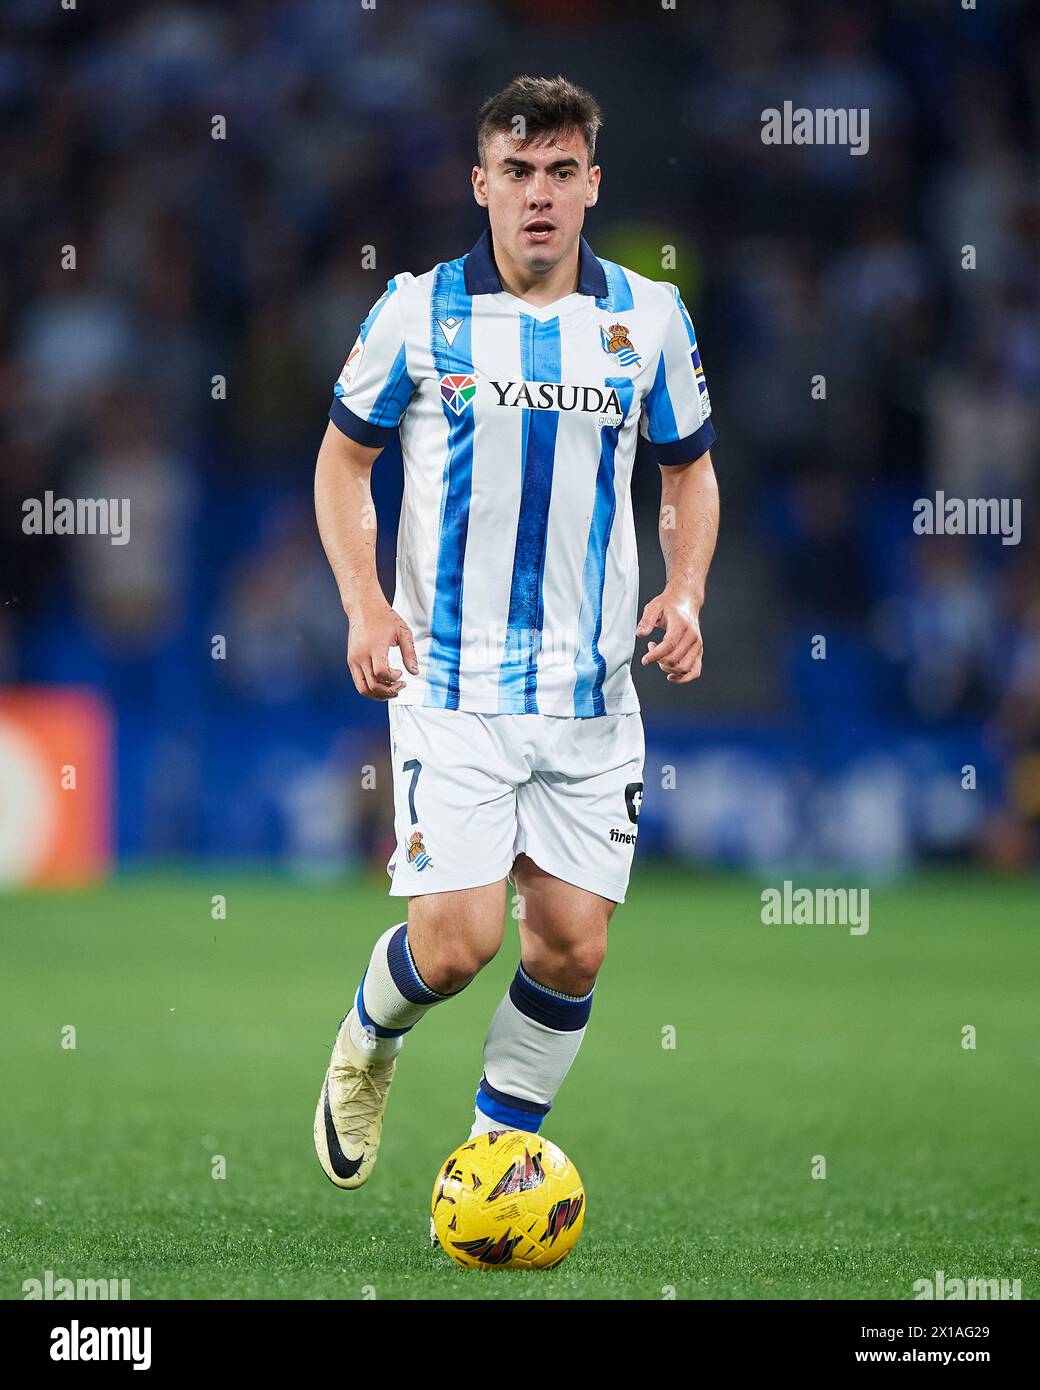 Ander Barrenetxea of Real Sociedad with the ball during the LaLiga EA Sports match between Real Sociedad and UD Almeria at Reale Arnea Stadium on Apri Stock Photo